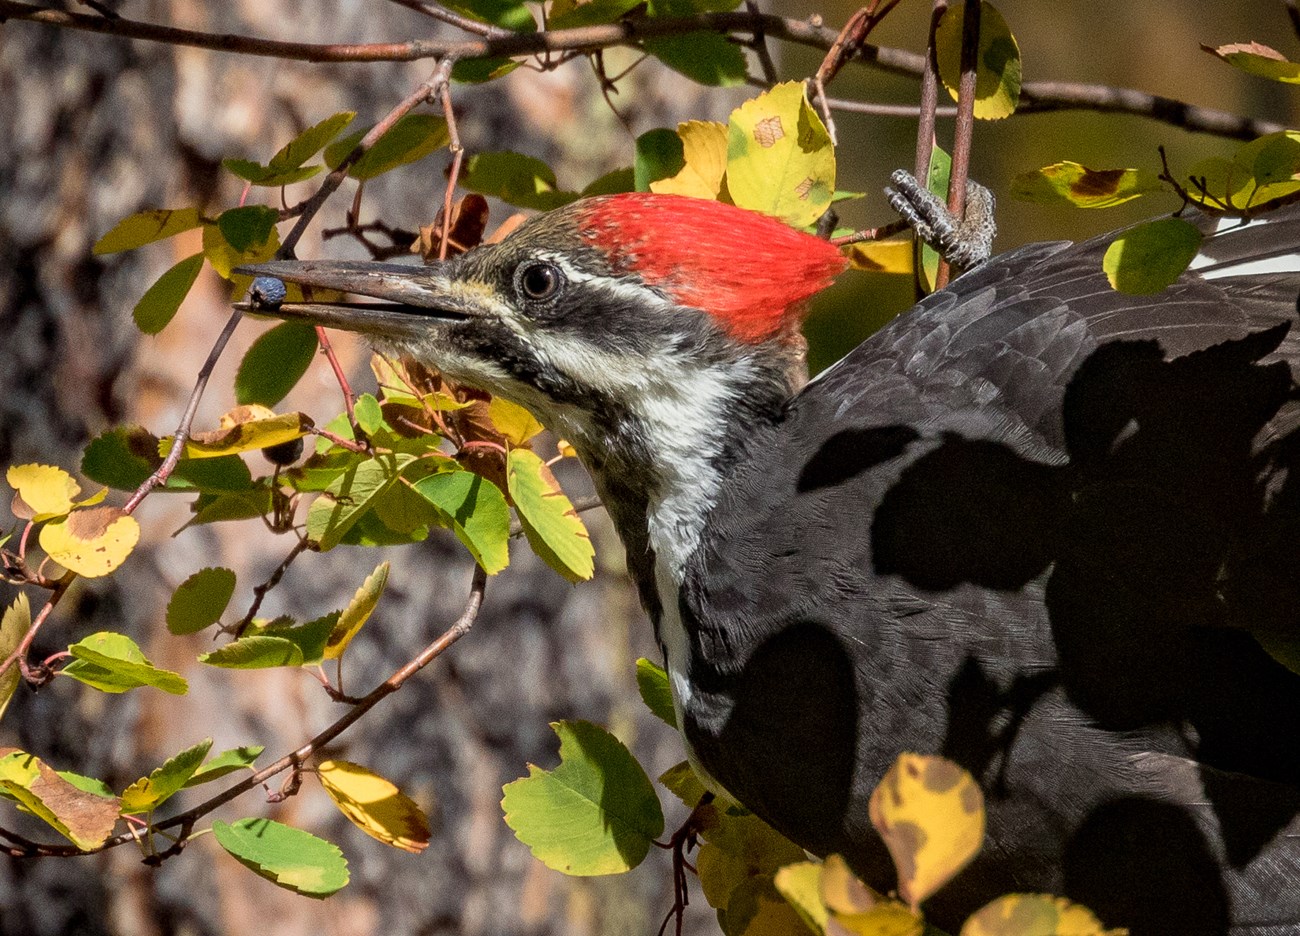 Face and front of a woodpecker, with a black body, red pointed crest, brown forehead, white cheek stripes, and a small blue berry in its beak. Photo credit, copyright Nick Viani.